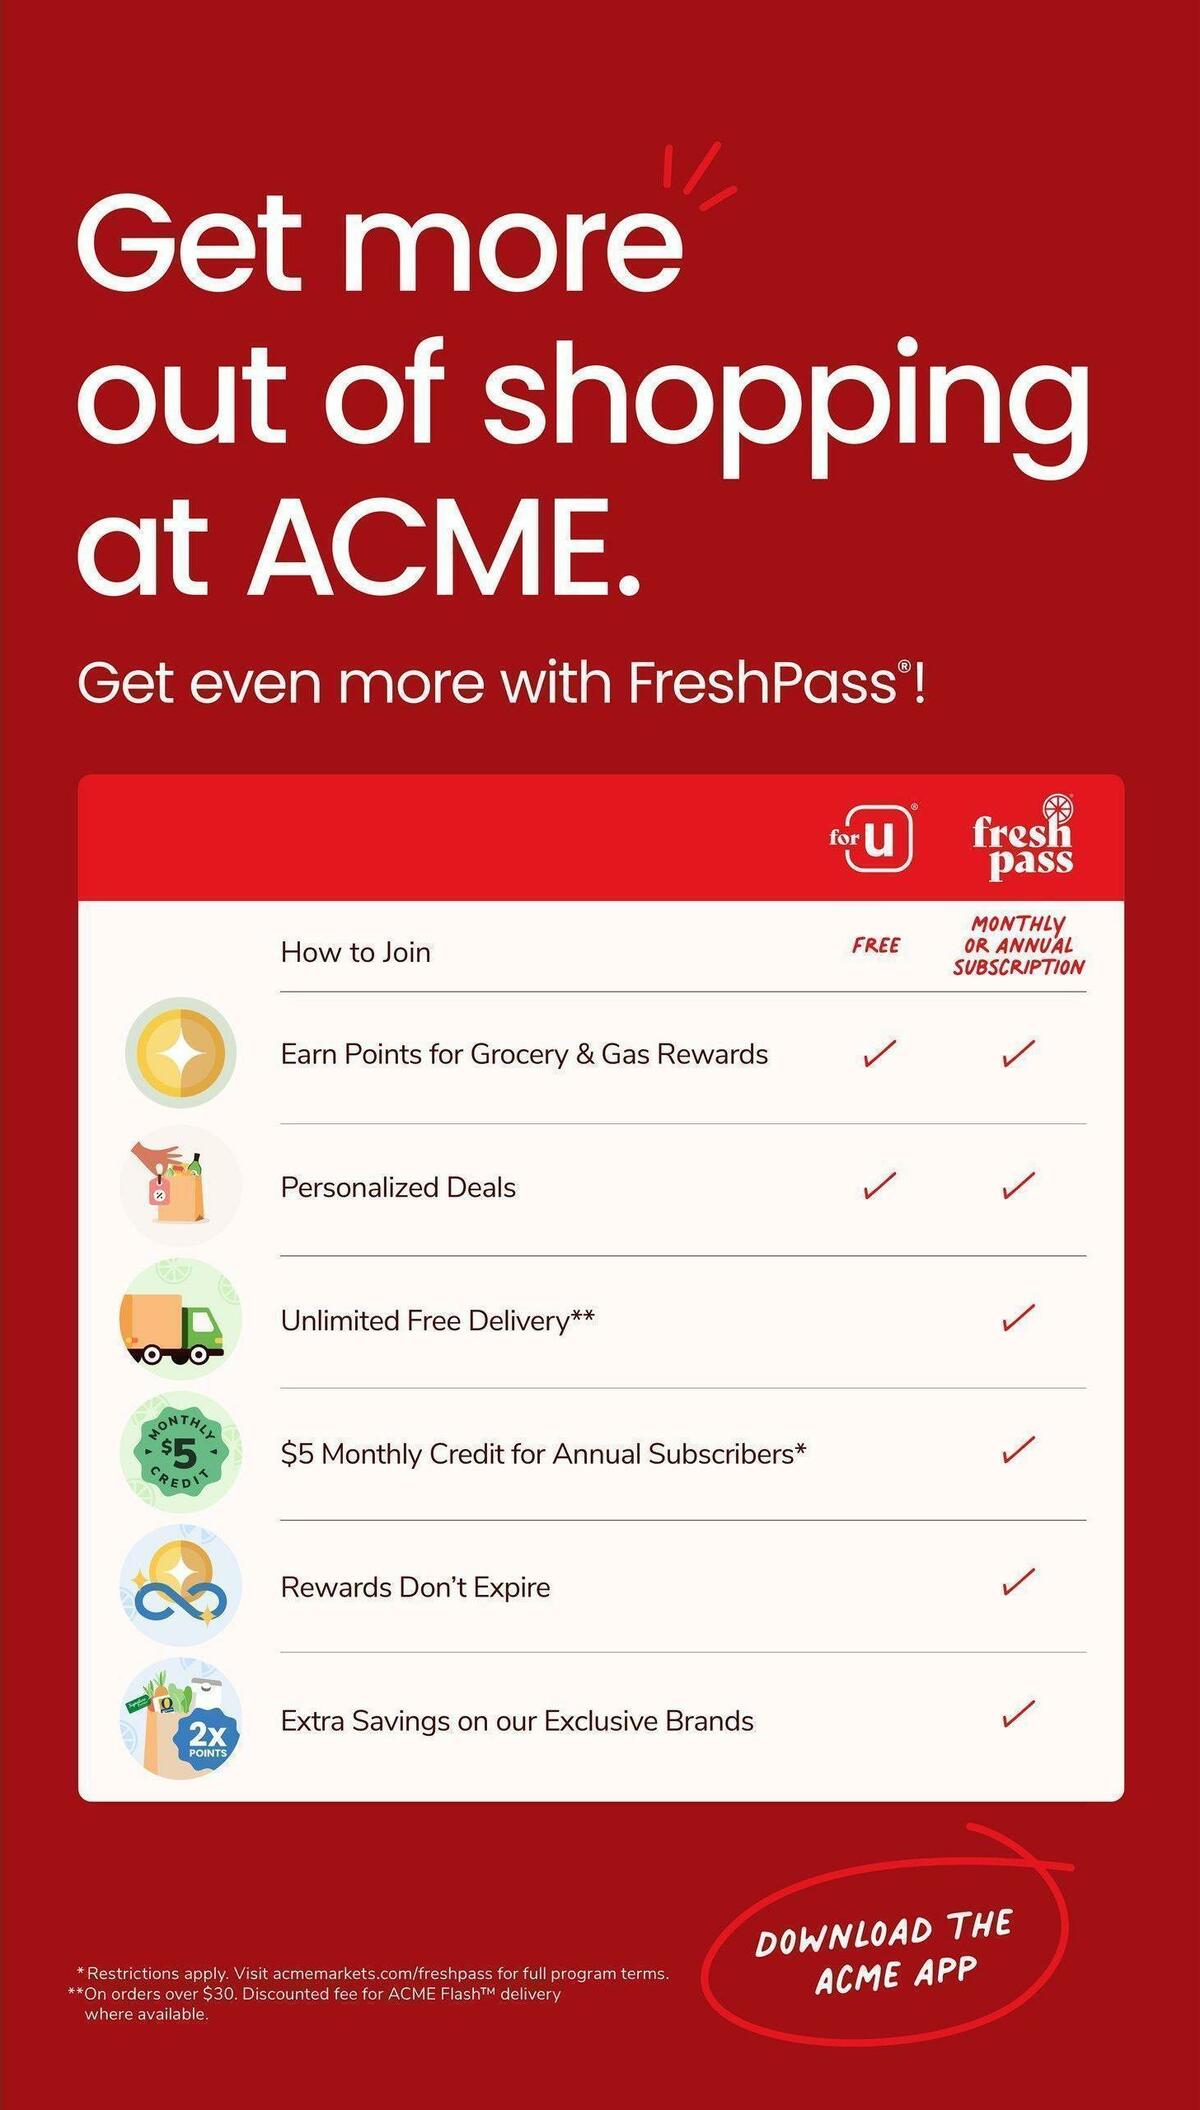 ACME Markets Weekly Ad from April 28